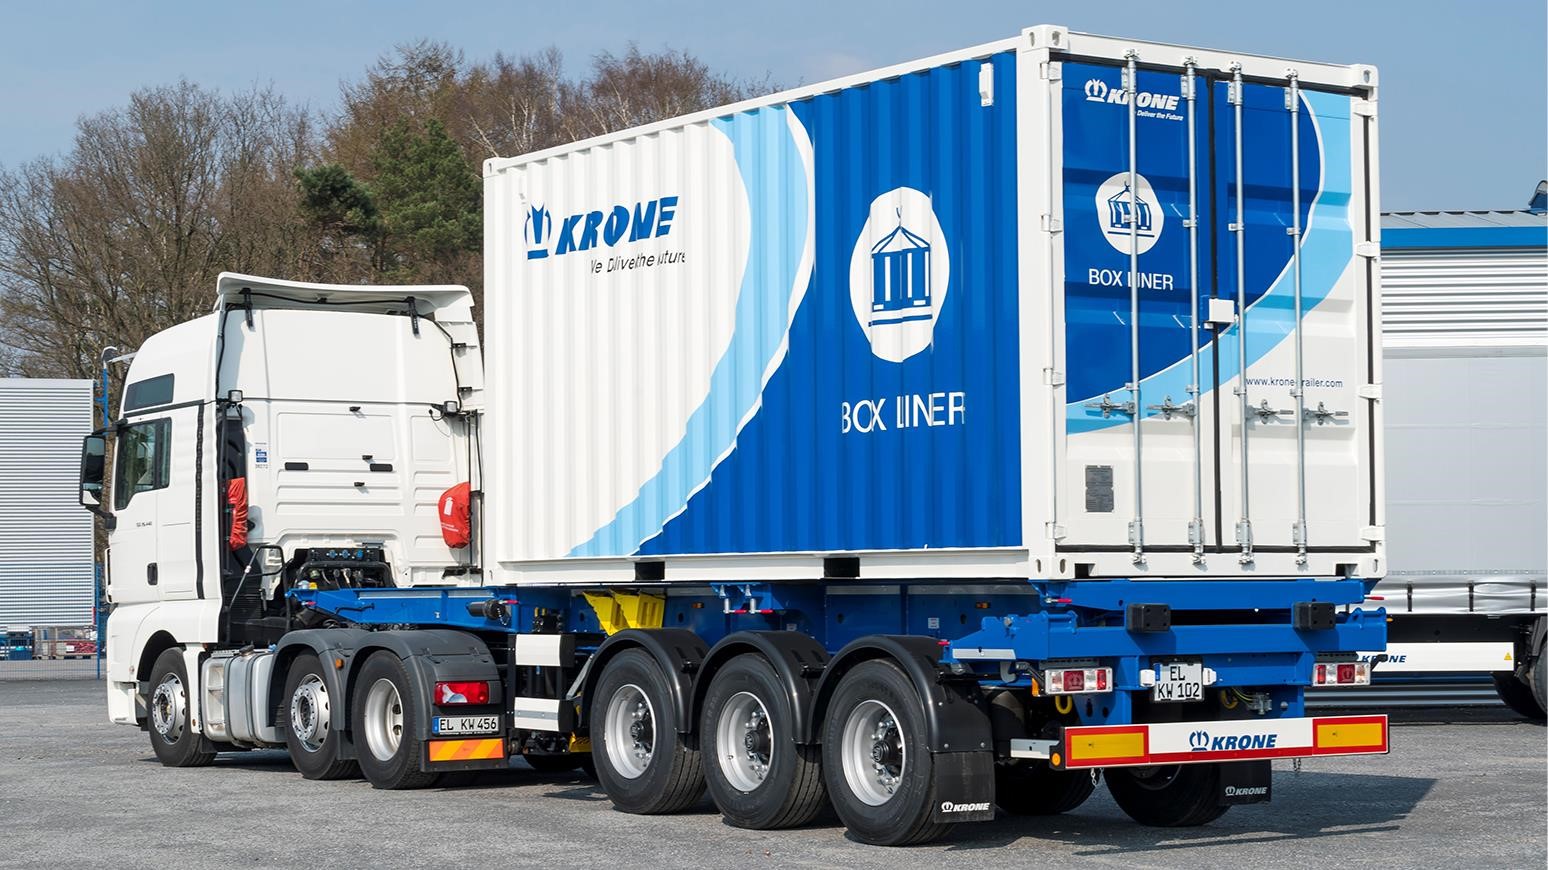 Krone To Showcase Versatile Box Liner Container Carrier At Birmingham’s Multimodal 2022 Trade Show